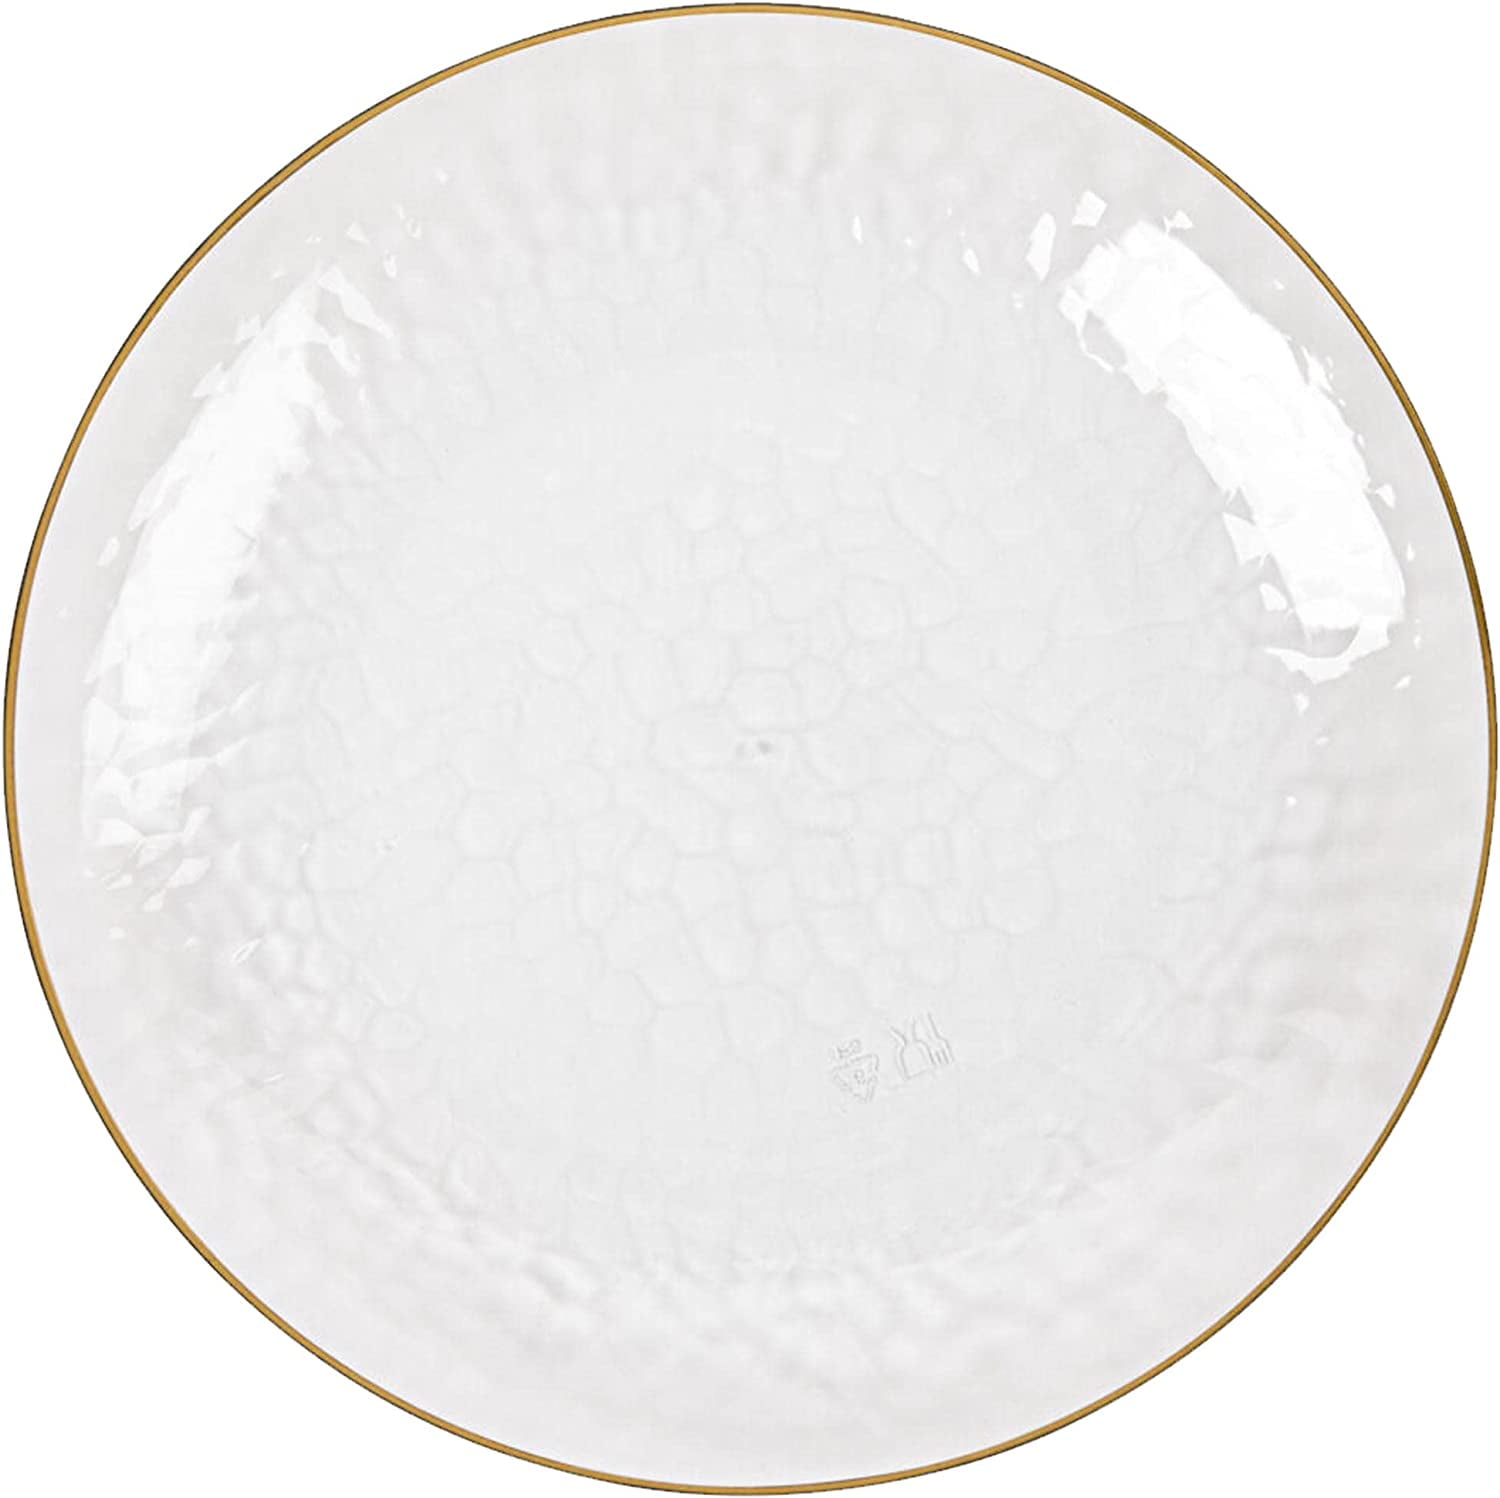 EcoQuality 9 inch Round Hammered Clear Plastic Dinner Plates with Gold Rim  - China Like Party Plates, Heavy Duty Large Disposable Charger Salad Plate